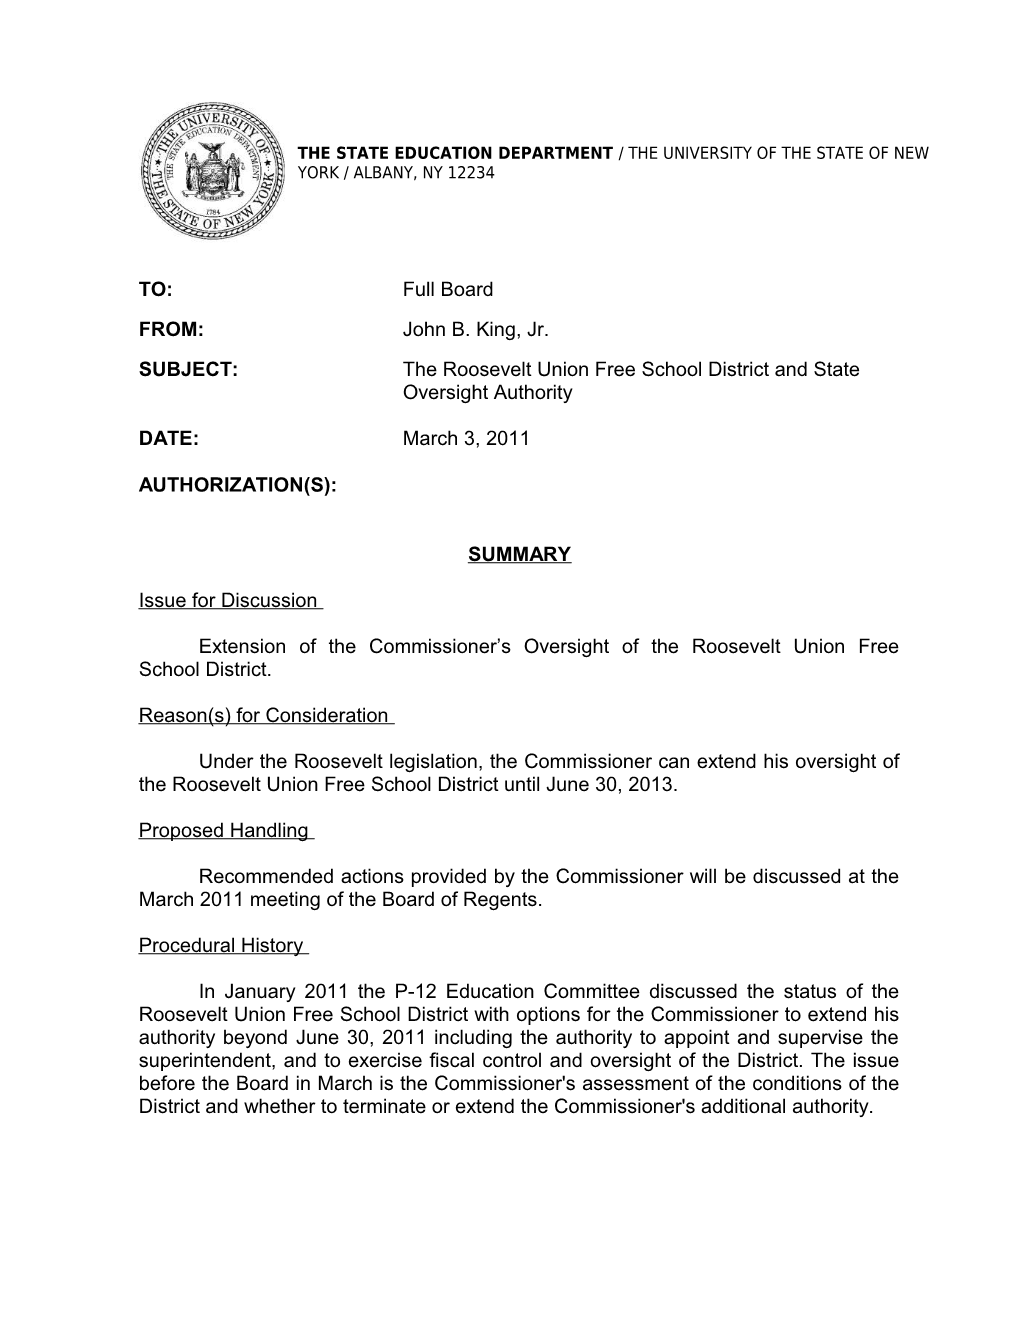 Extension of the Commissioner S Oversight of the Roosevelt Union Free School District